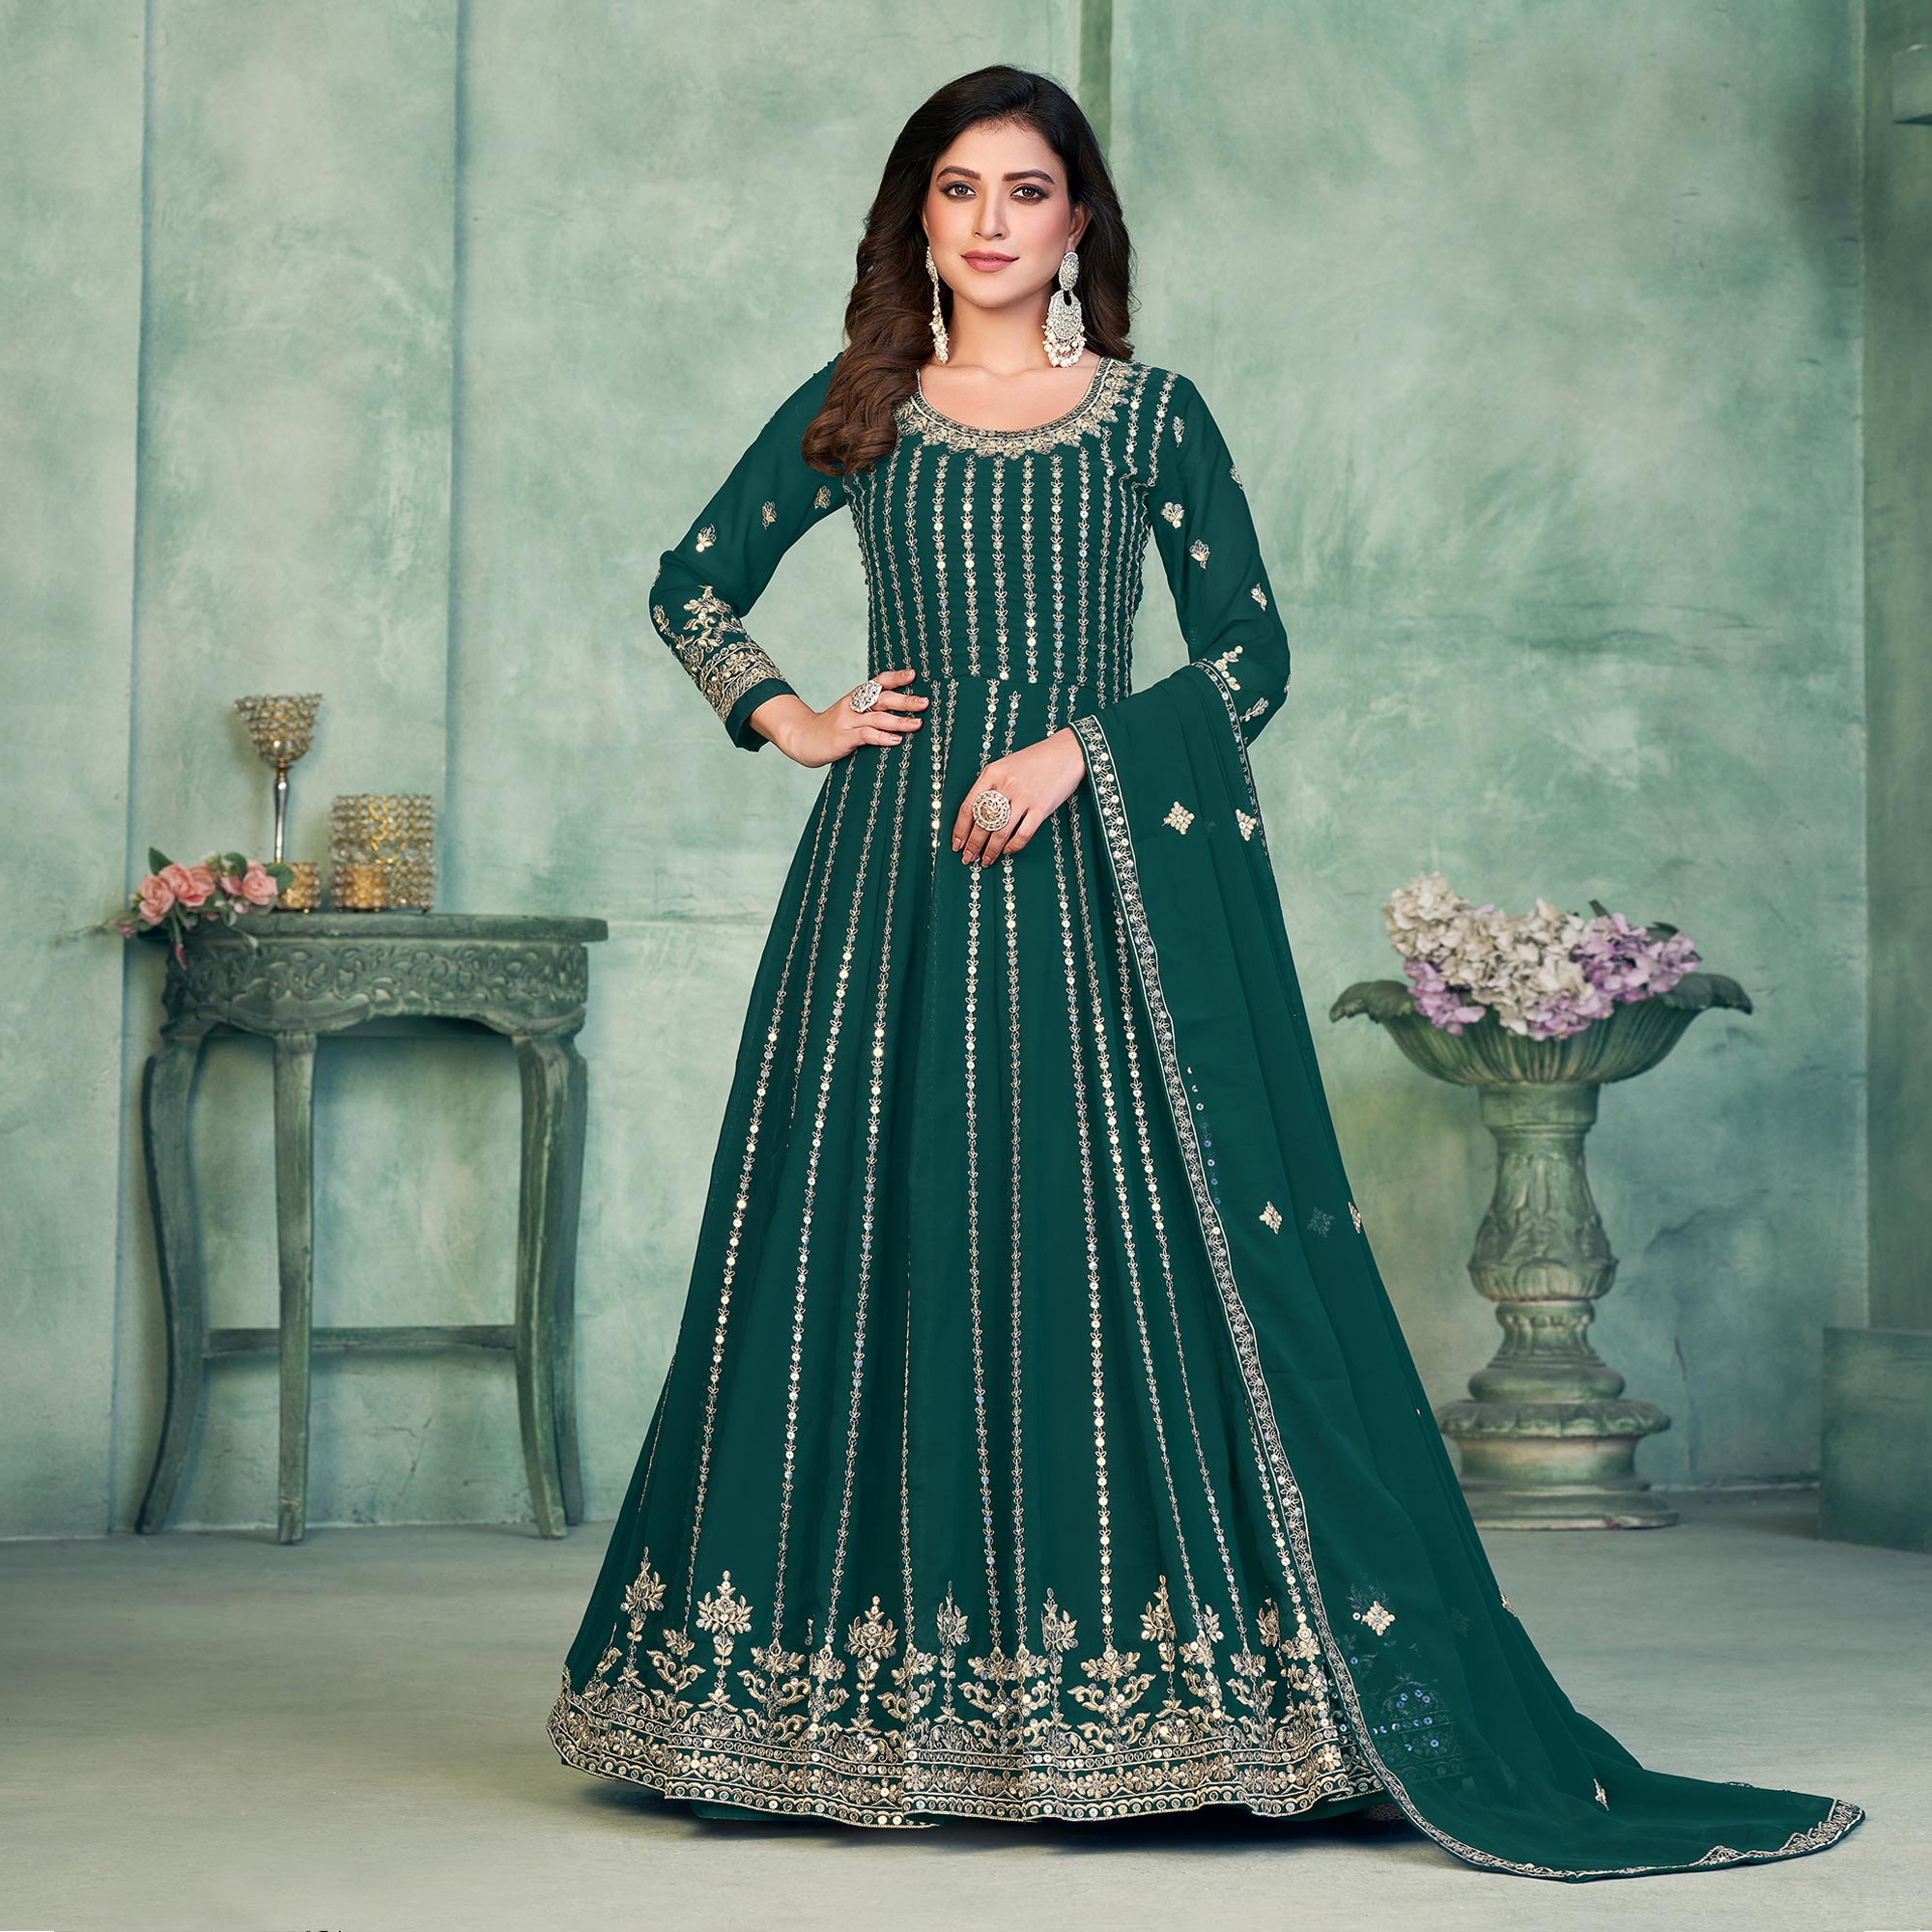 Rama Green Sequins Embroidered Georgette Semi Stitched Anarkali Suit